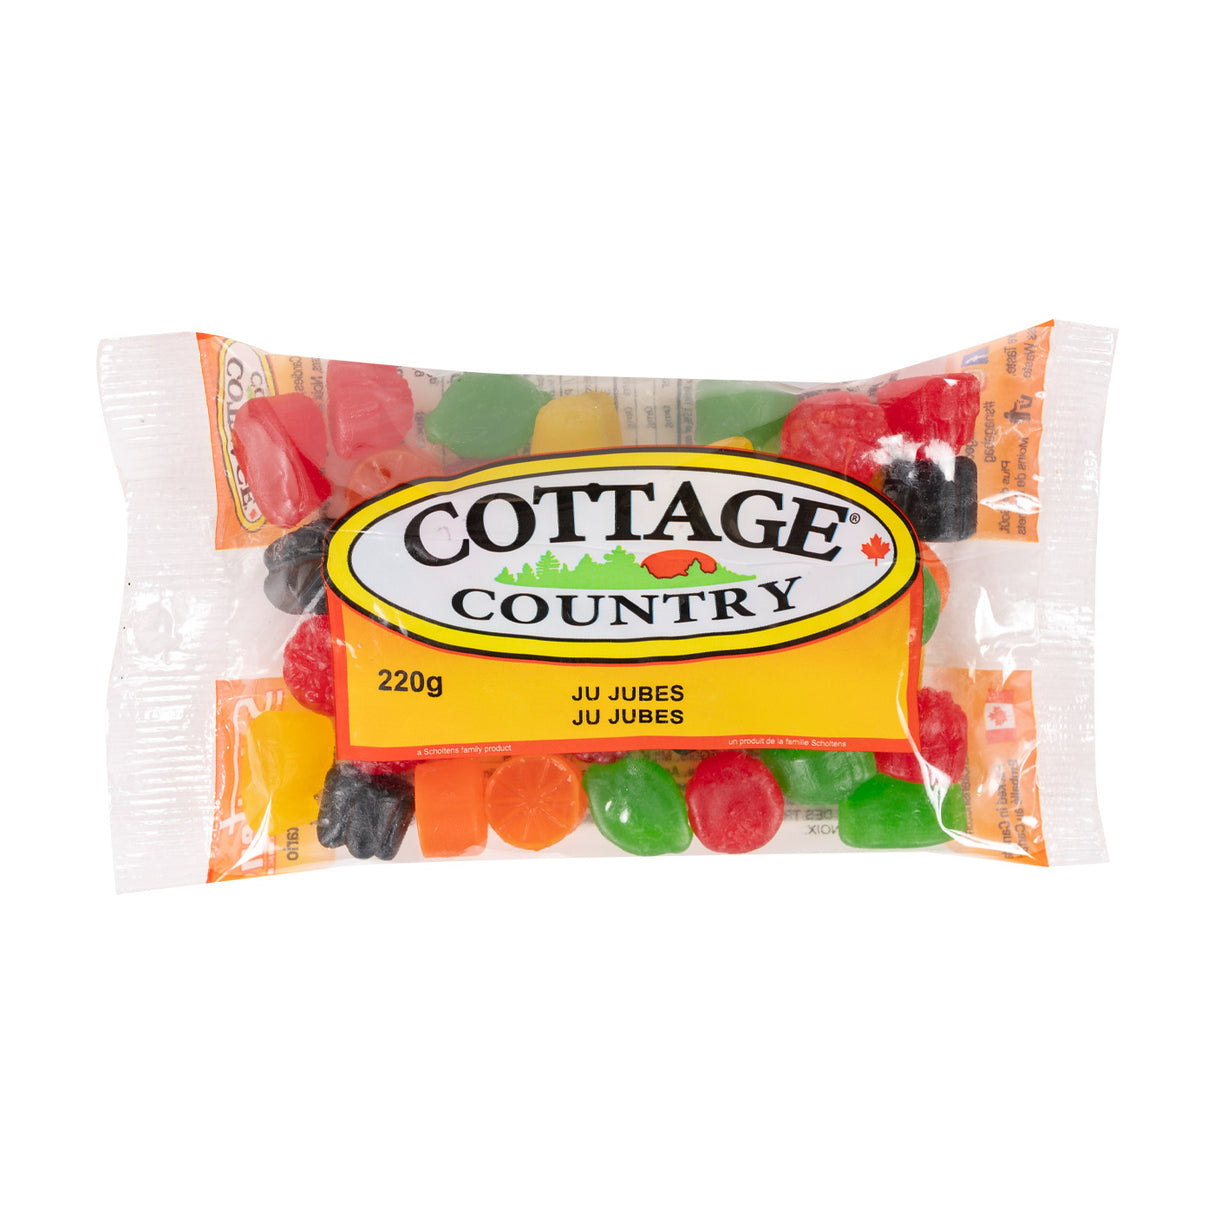 Cottage Country Ju Jubes 220 g